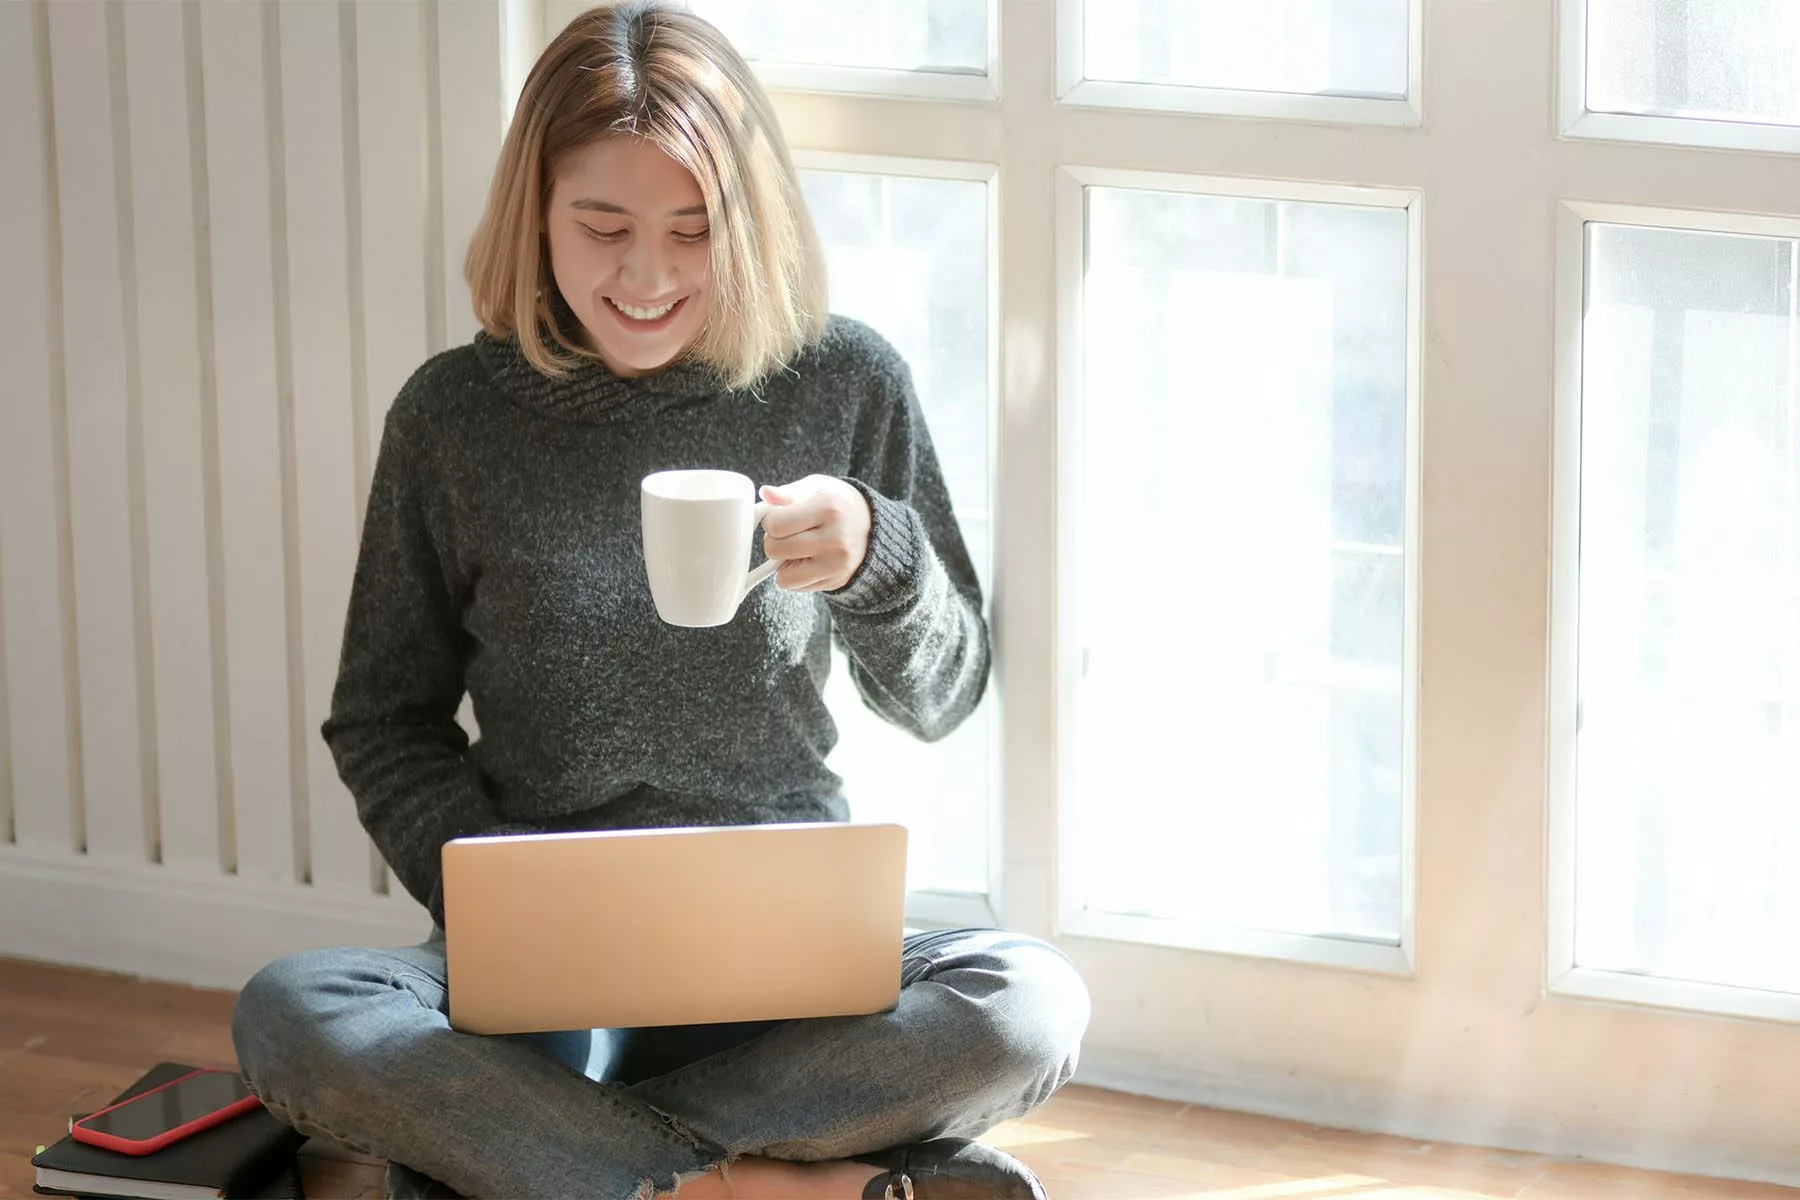 image of smiling person sitting on floor holding a cup of coffee holding a laptop in lap | multifamily qualified lead